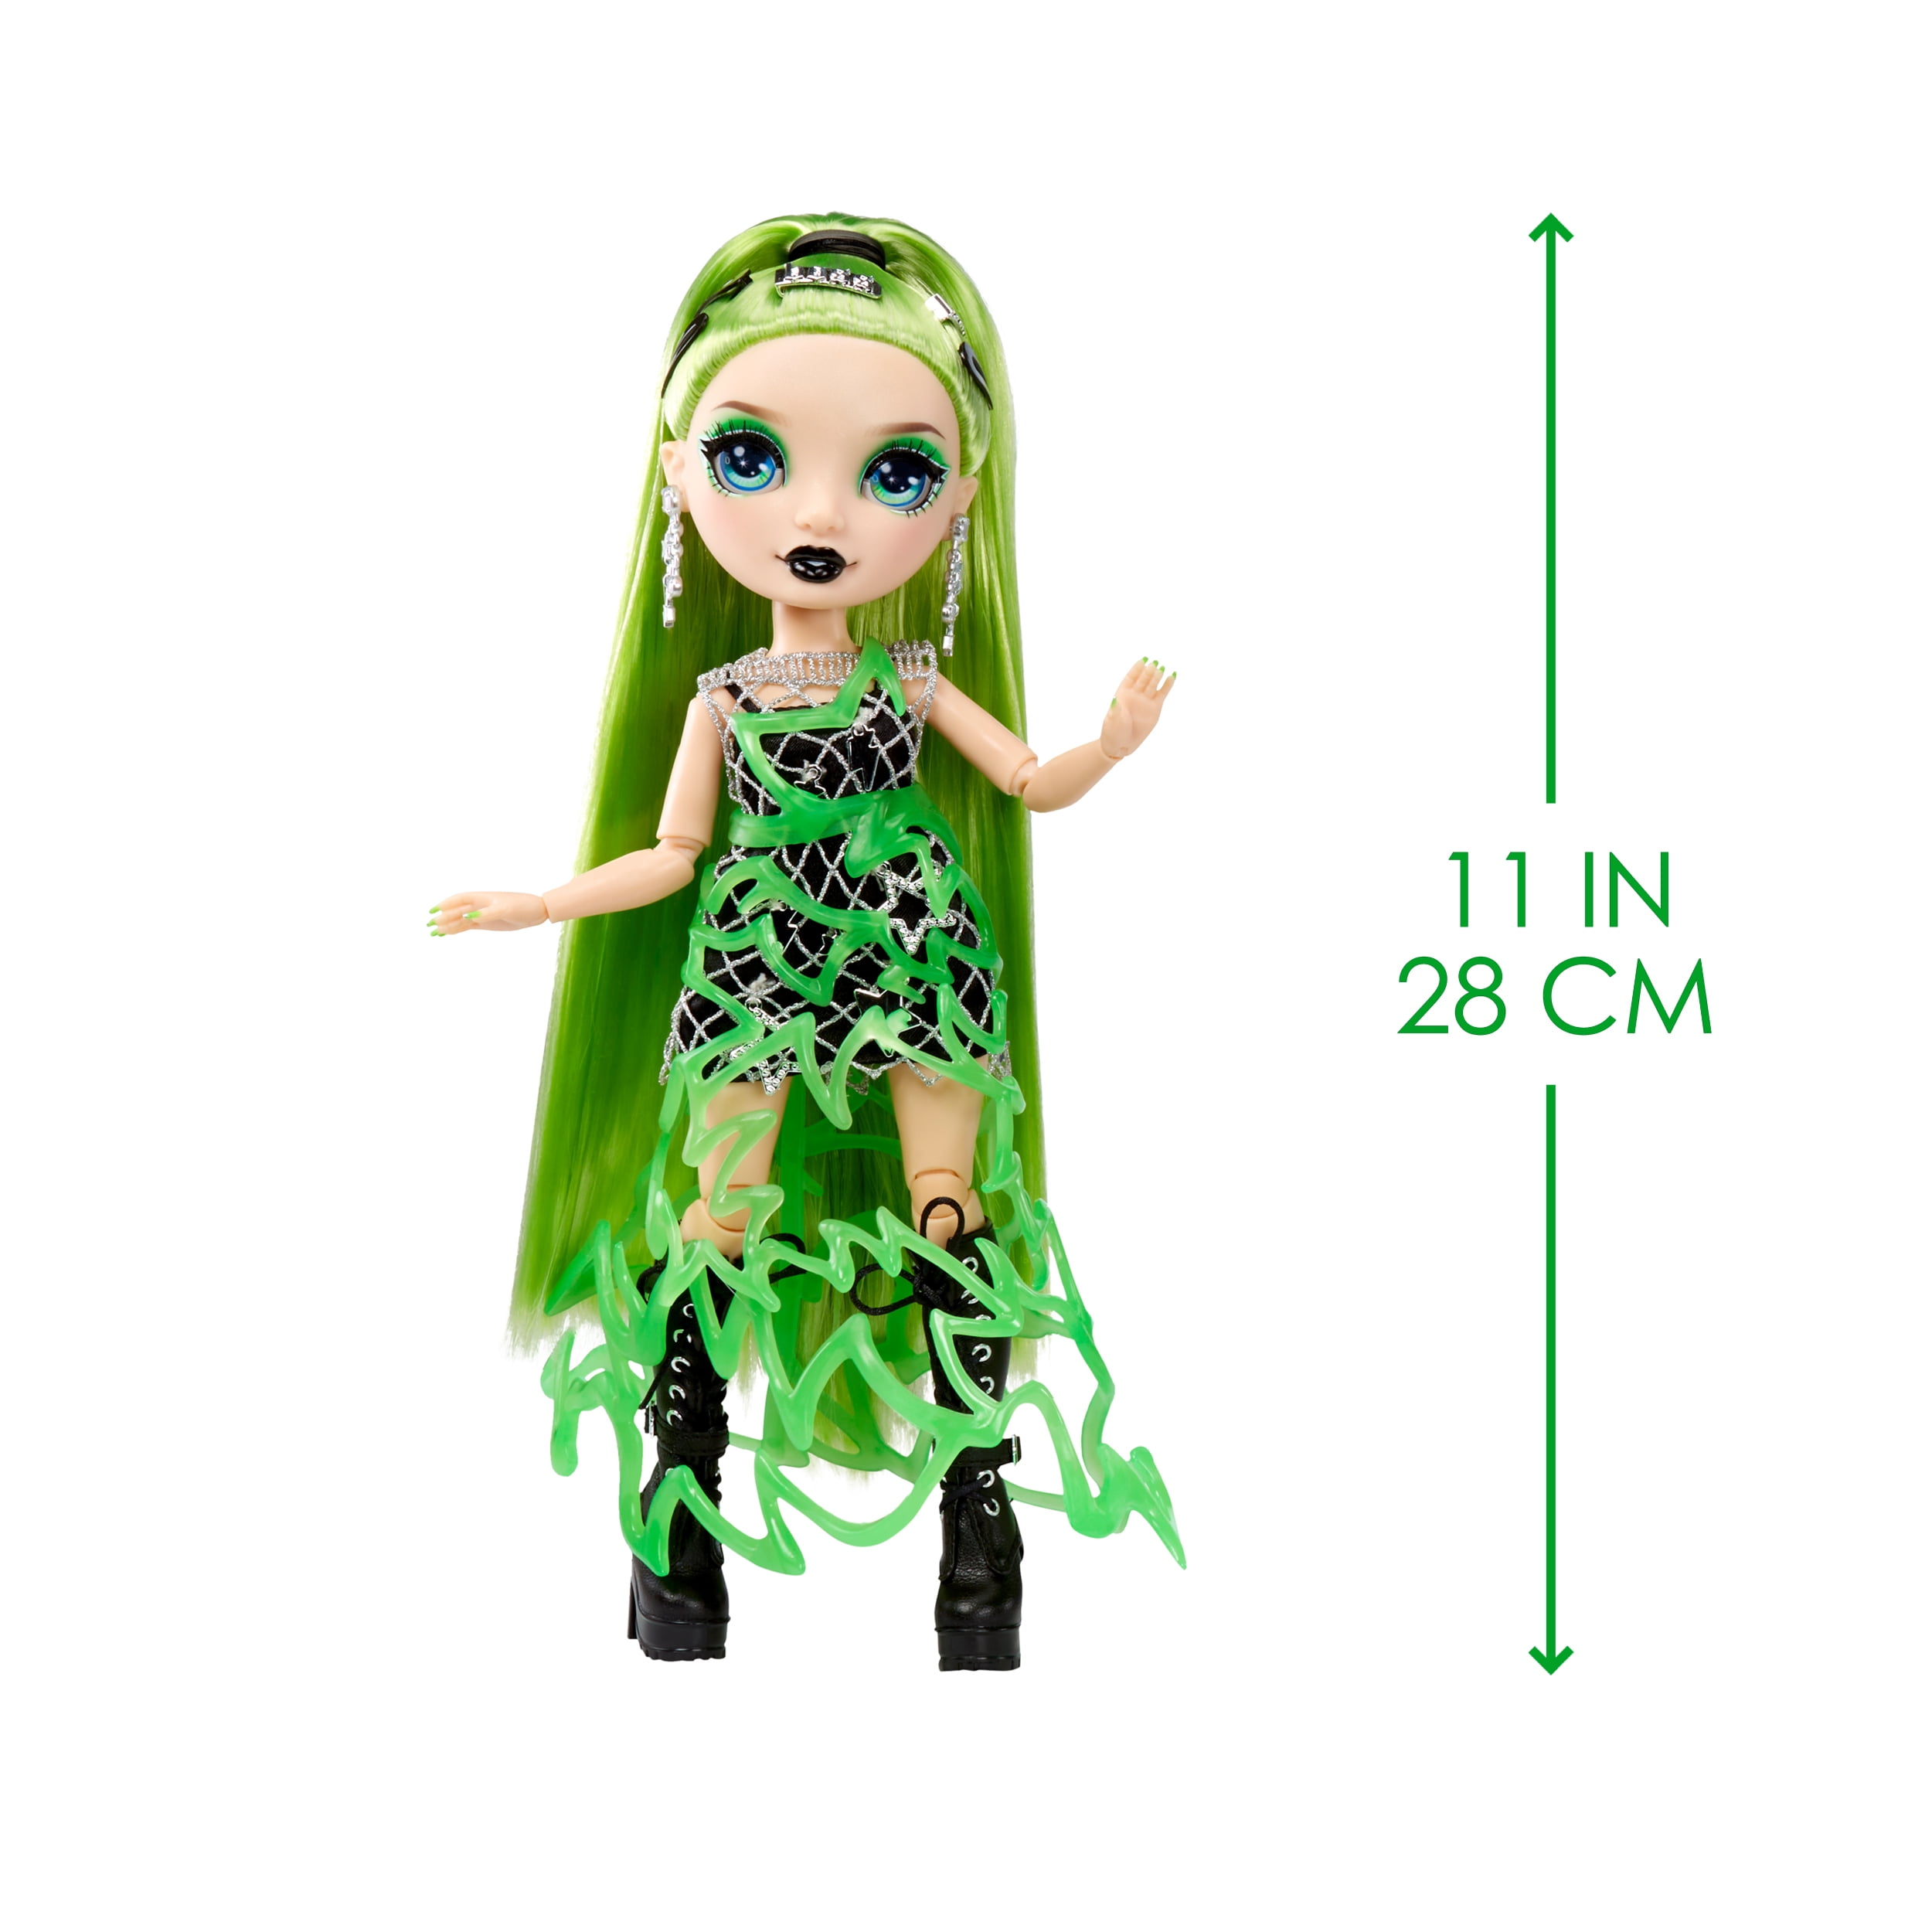 Rainbow High Rainbow Surprise Jade Green Clothes Fashion Doll with